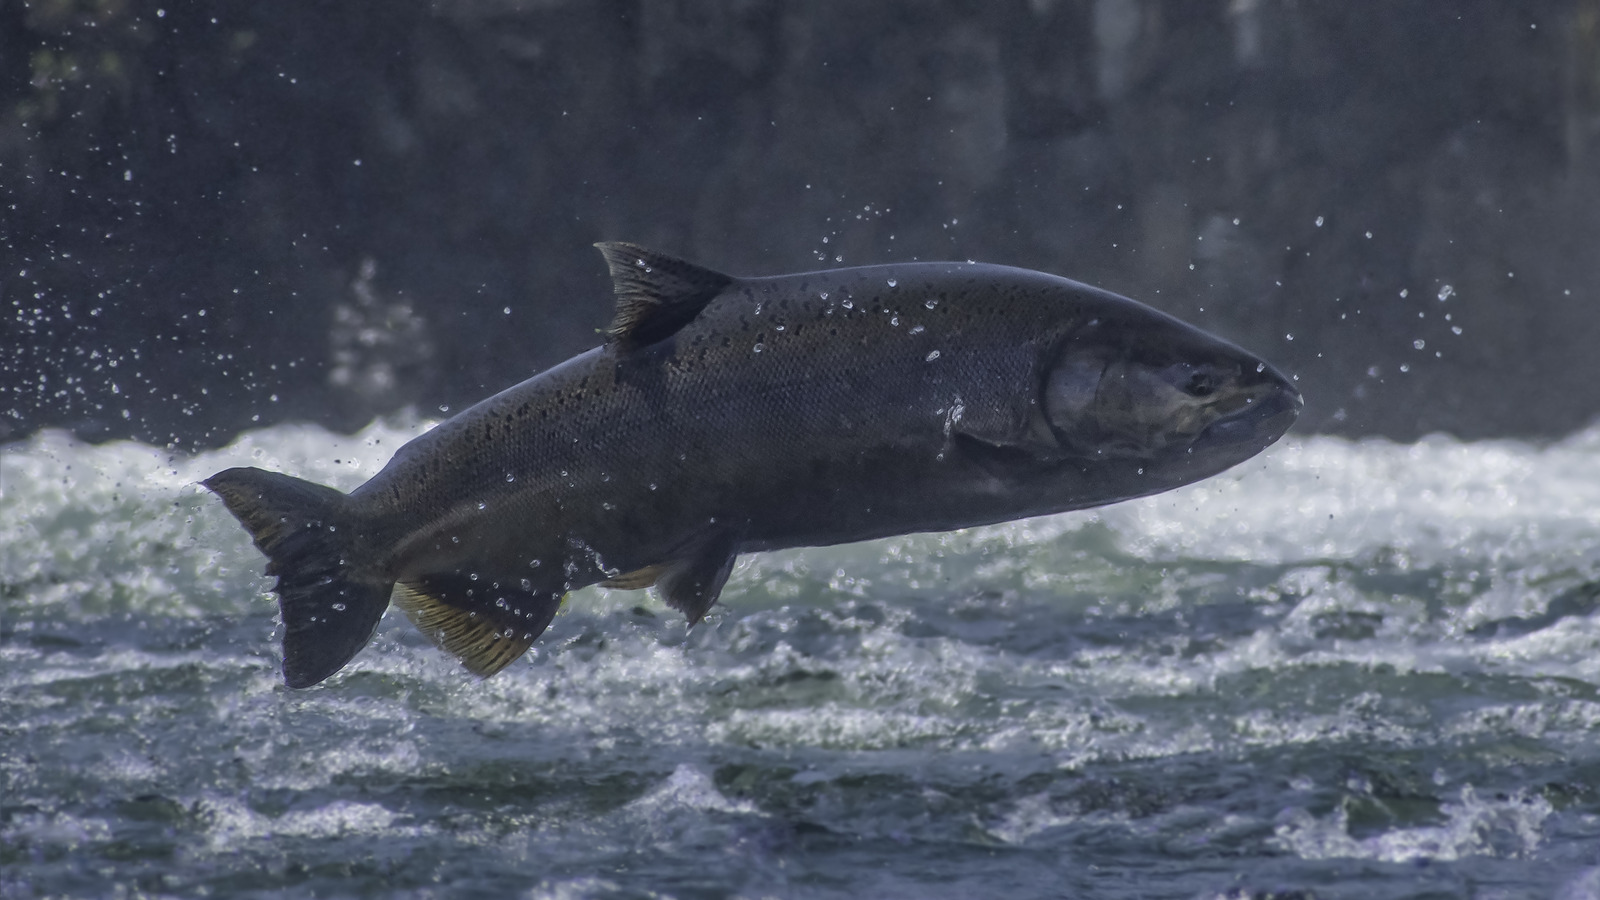 How To Determine If Salmon Was Wild-Caught By Looking At Its Tail